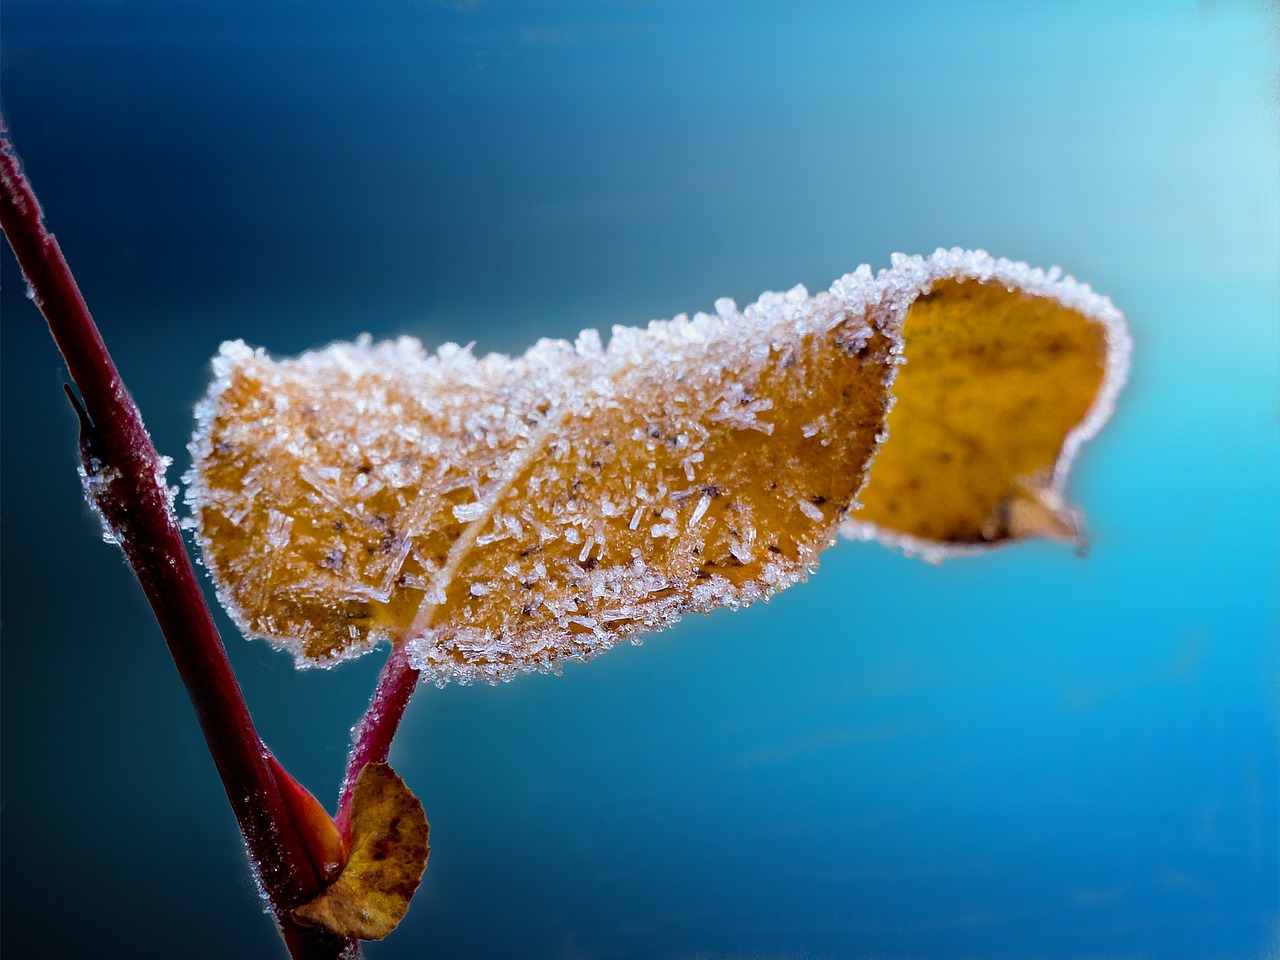 Frost on a plant leaf